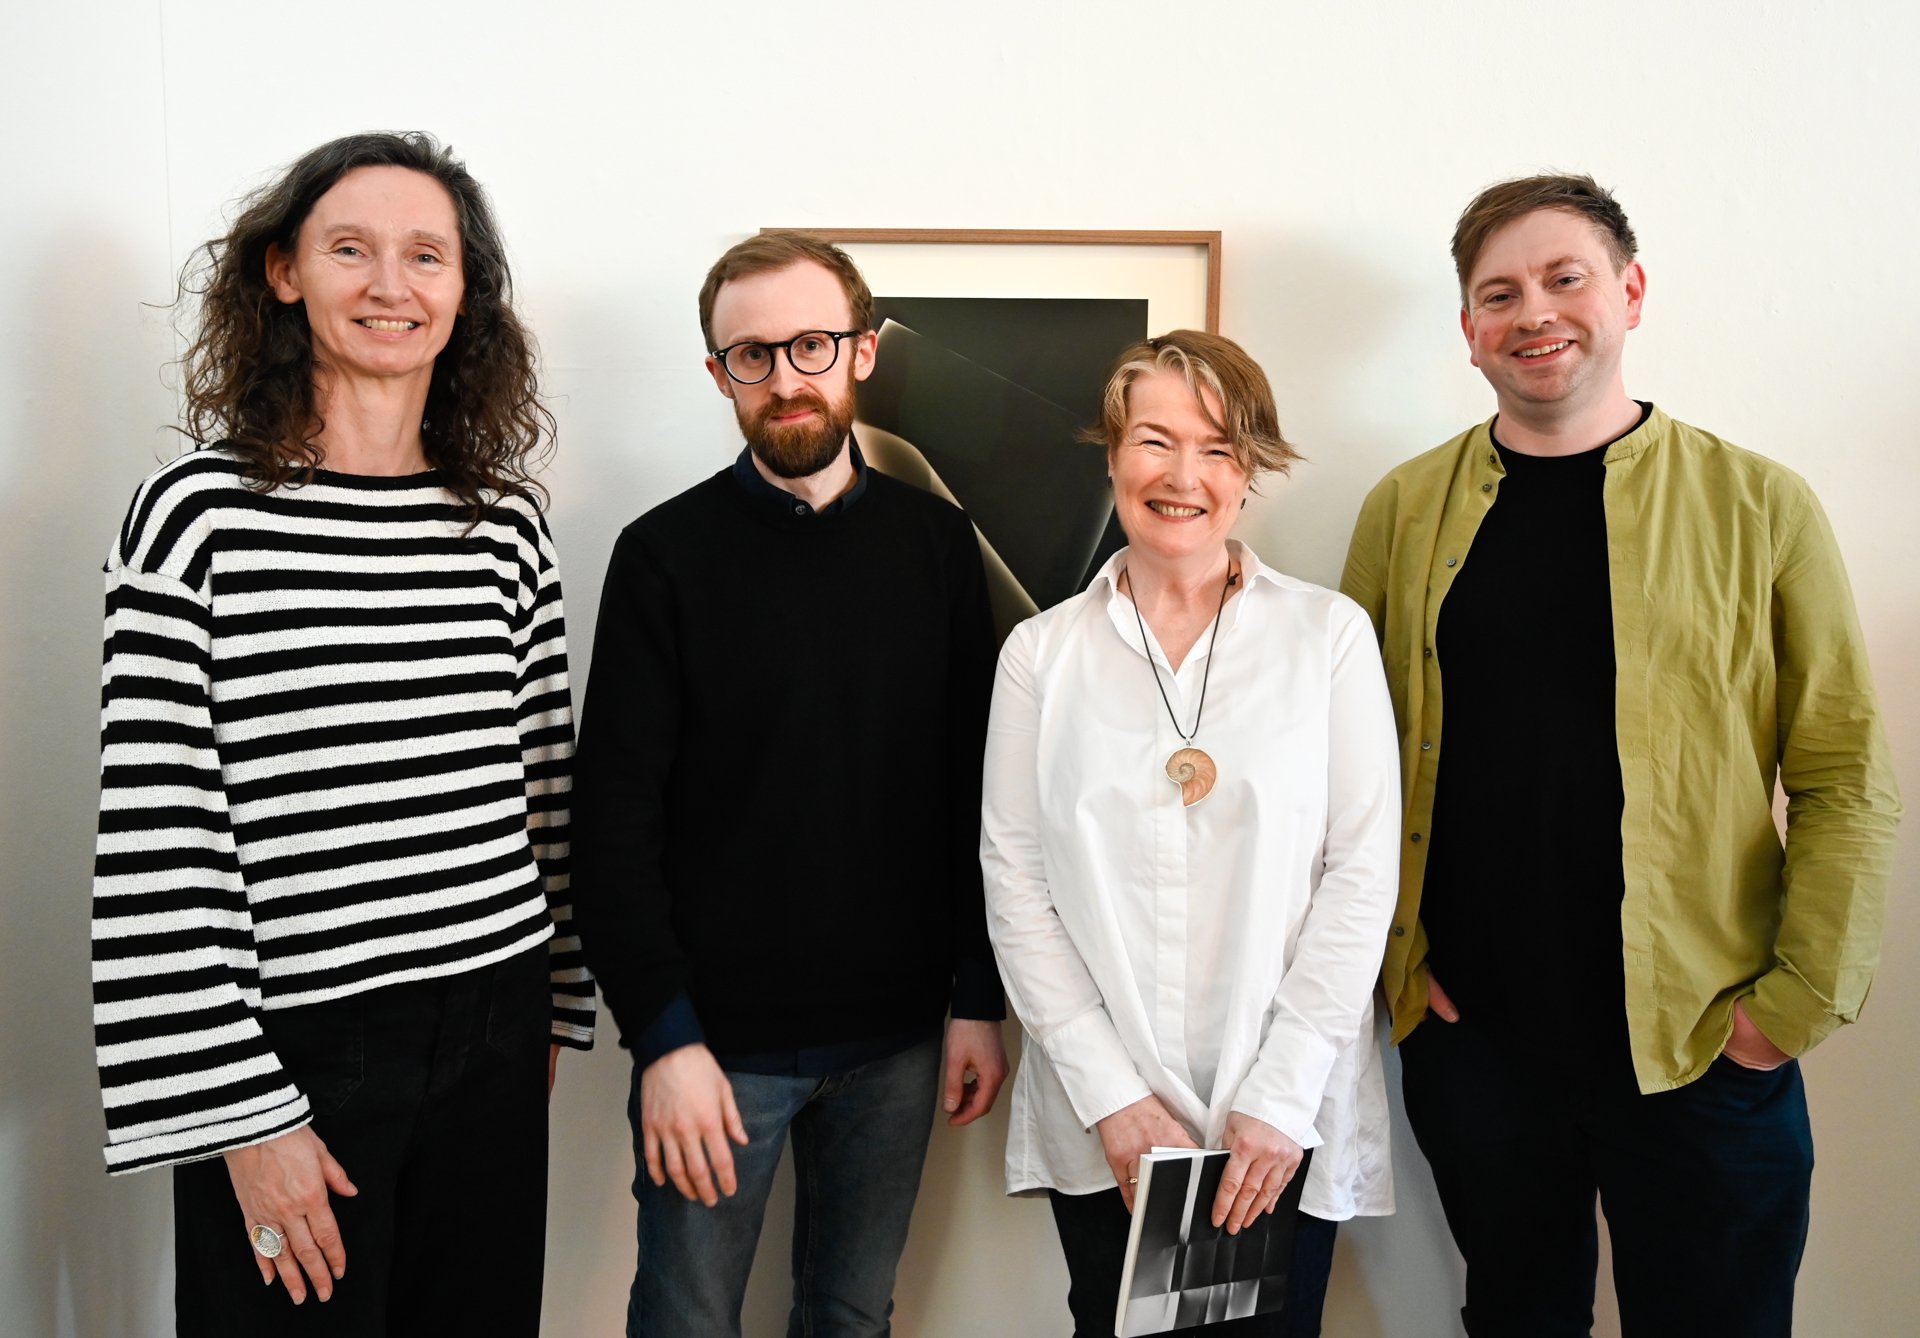 Maureen Kenelly, Director of The Arts Council of Ireland, Darren Campion, Assistant Curator Photo Museum Ireland, Artist Roseanne Lynch and Curator Pádraig Spillane